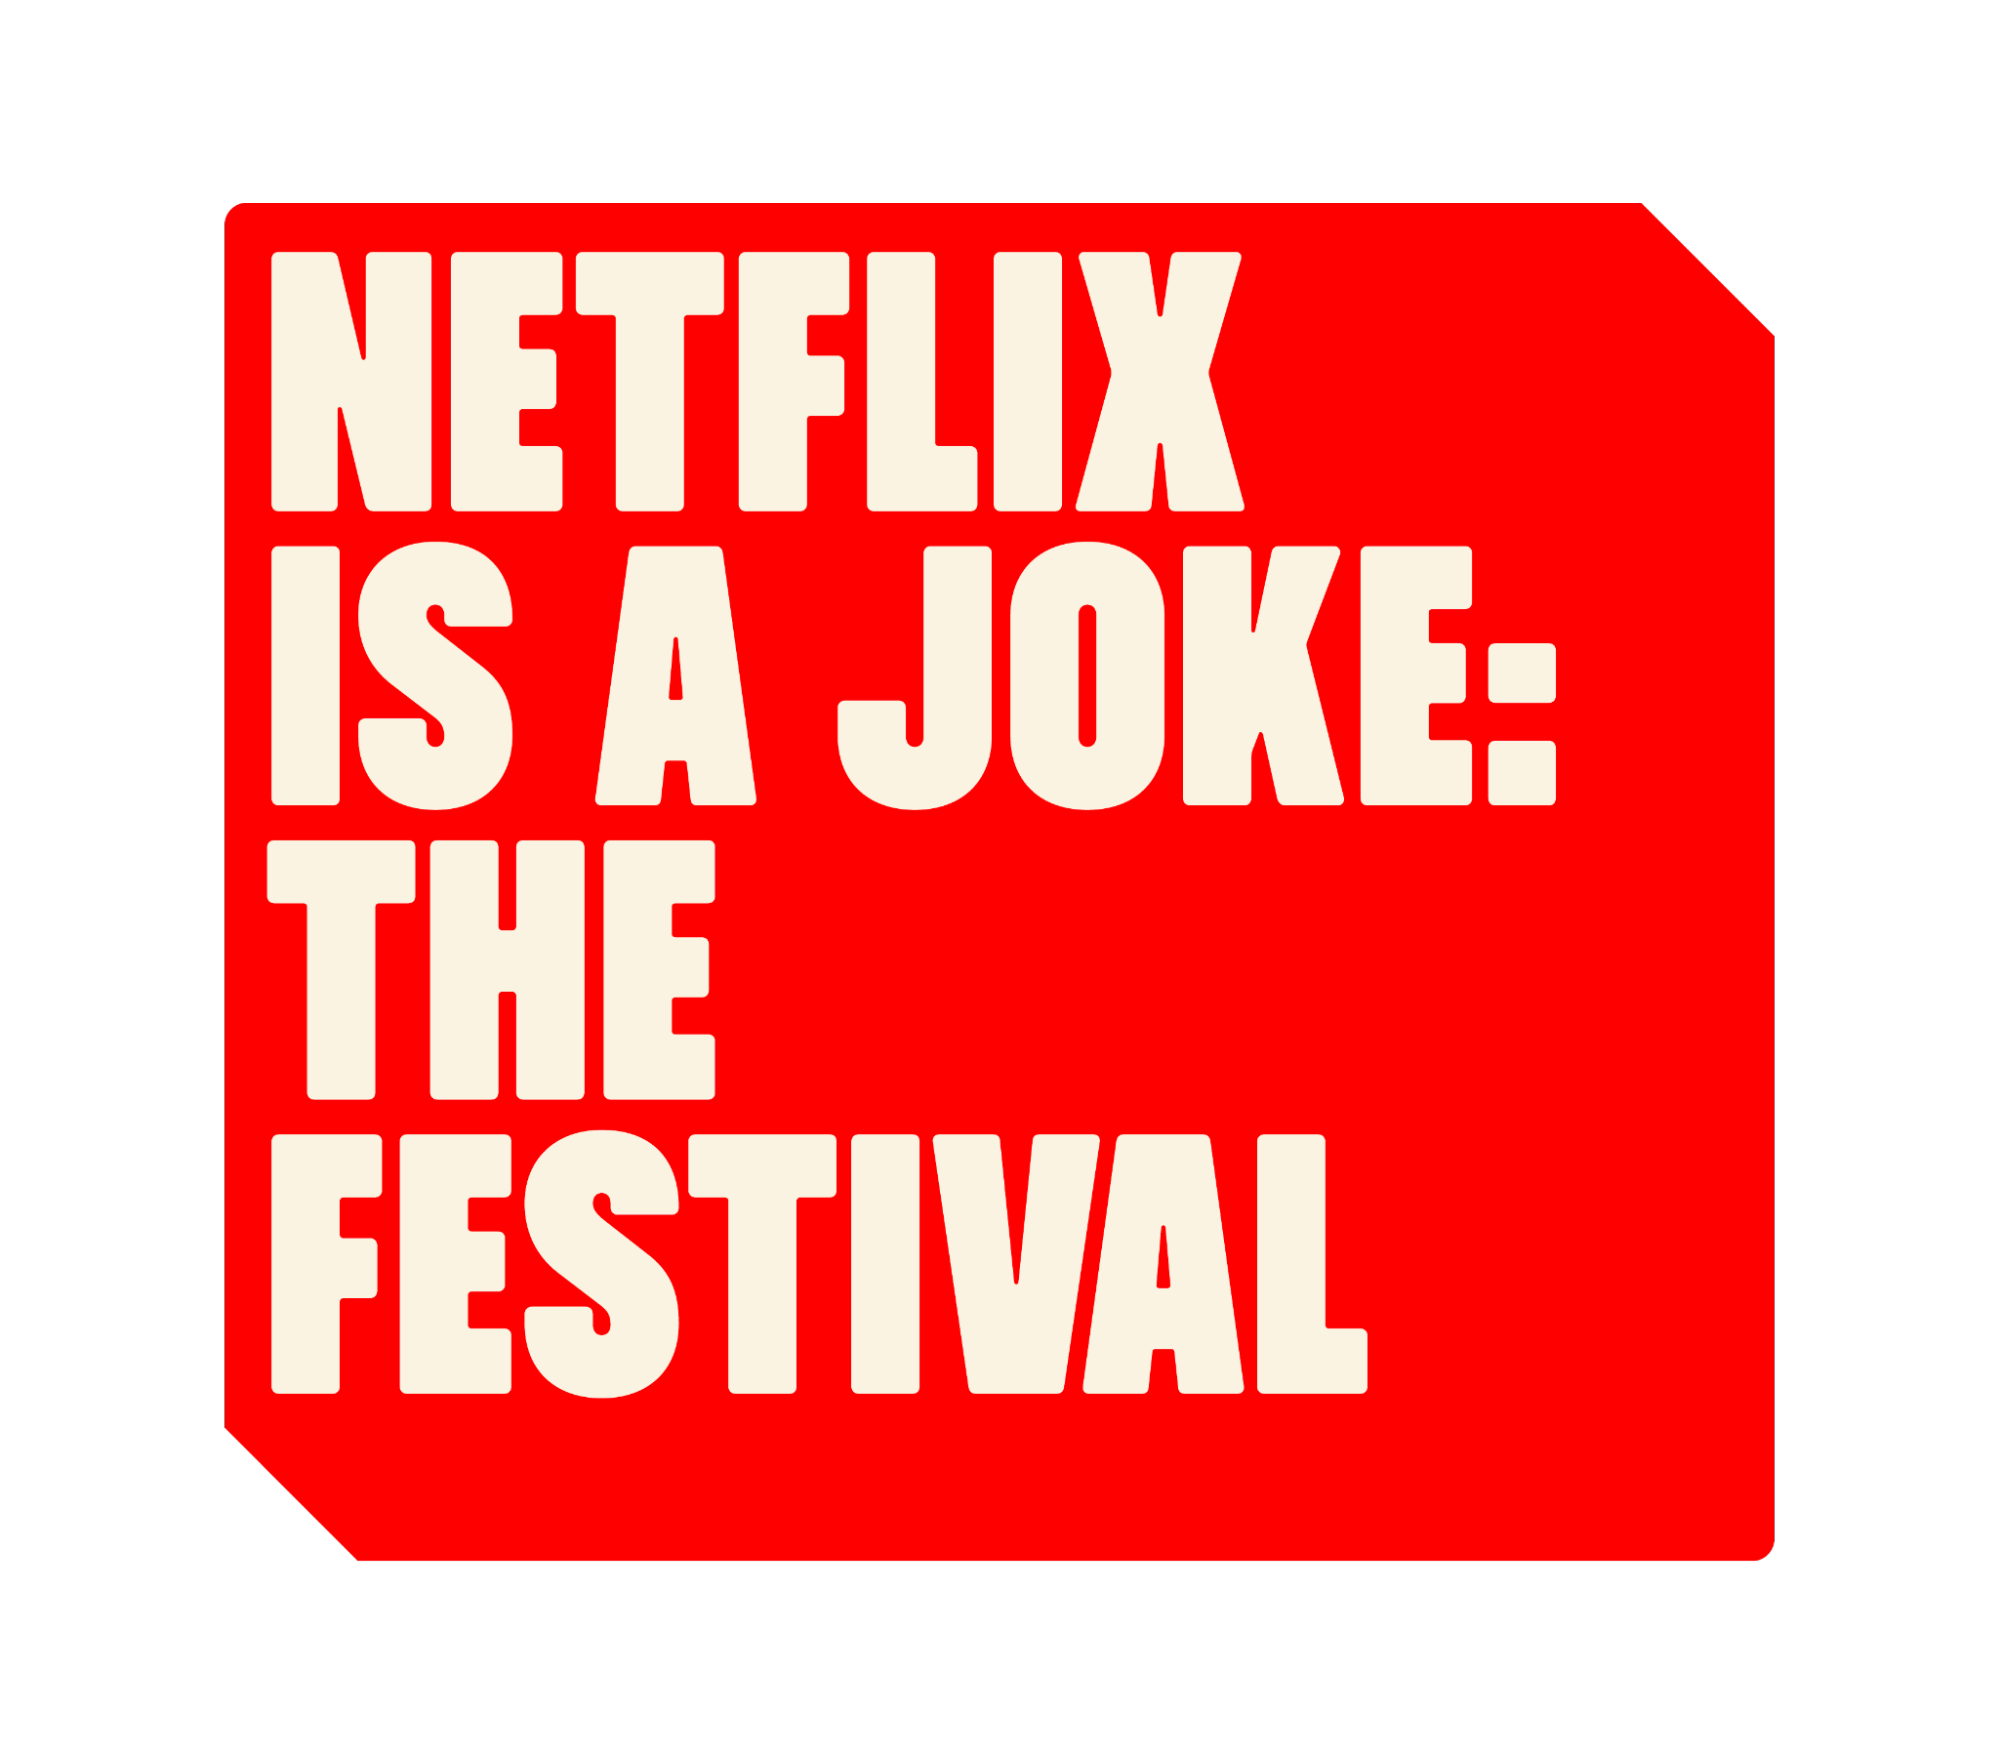 Netflix Is a Joke Announces 2022 Comedy Festival Featuring More Than 130  Artists Performing in Over